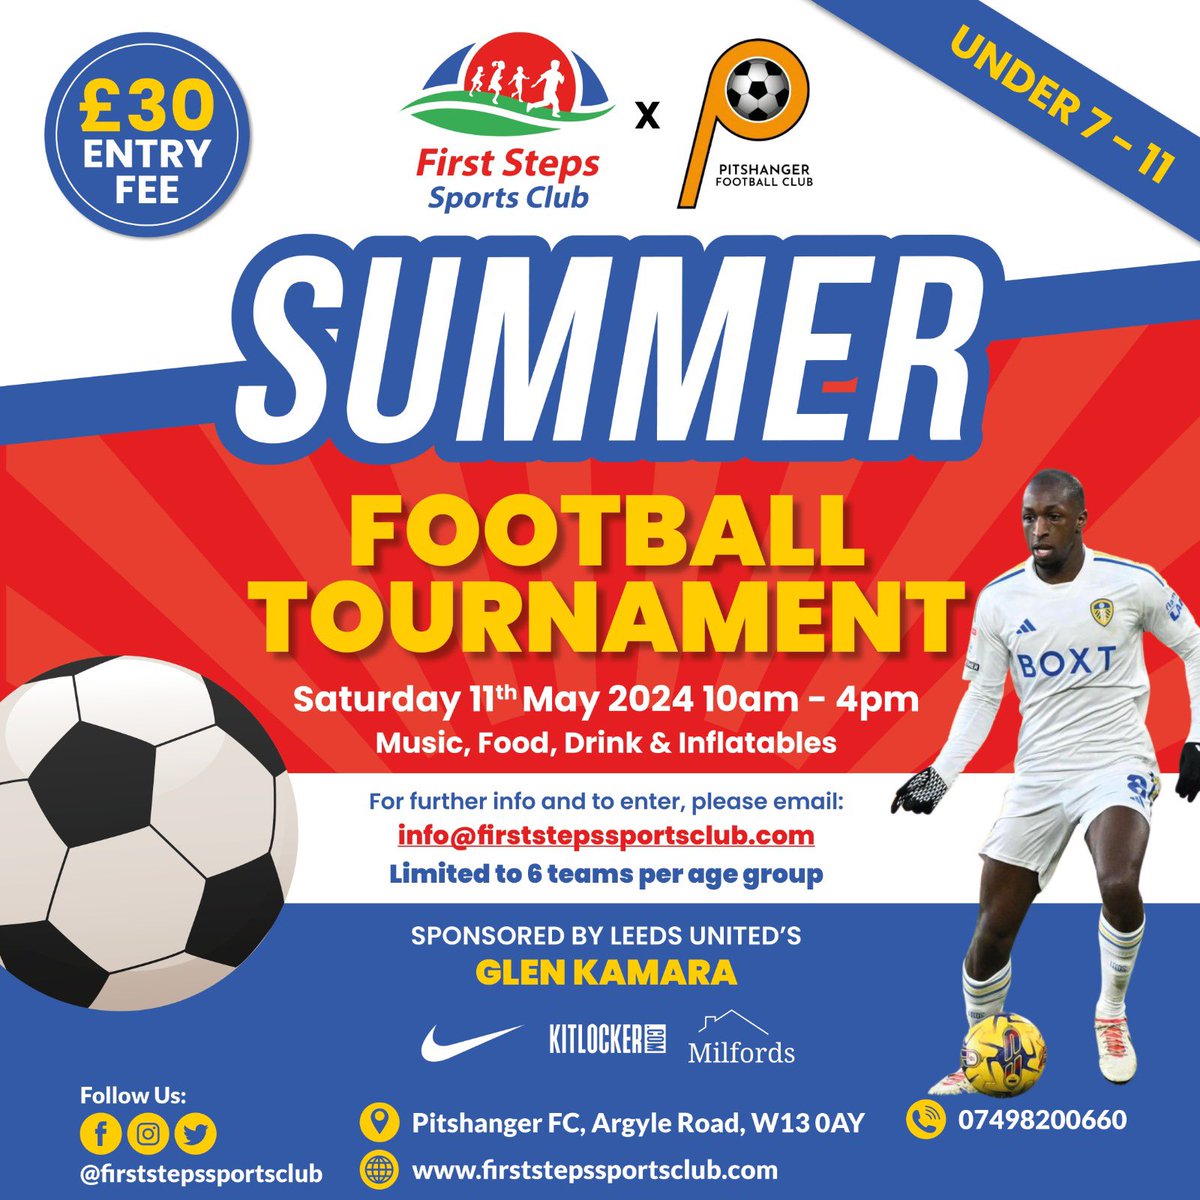 TOURNAMENT SEASON IS ALMOST AMONGST US! ☀️⚽️

We are happy to release the details of our upcoming summer tournament in collaboration with Pitshanger FC and sponsored by @GlenKamara4